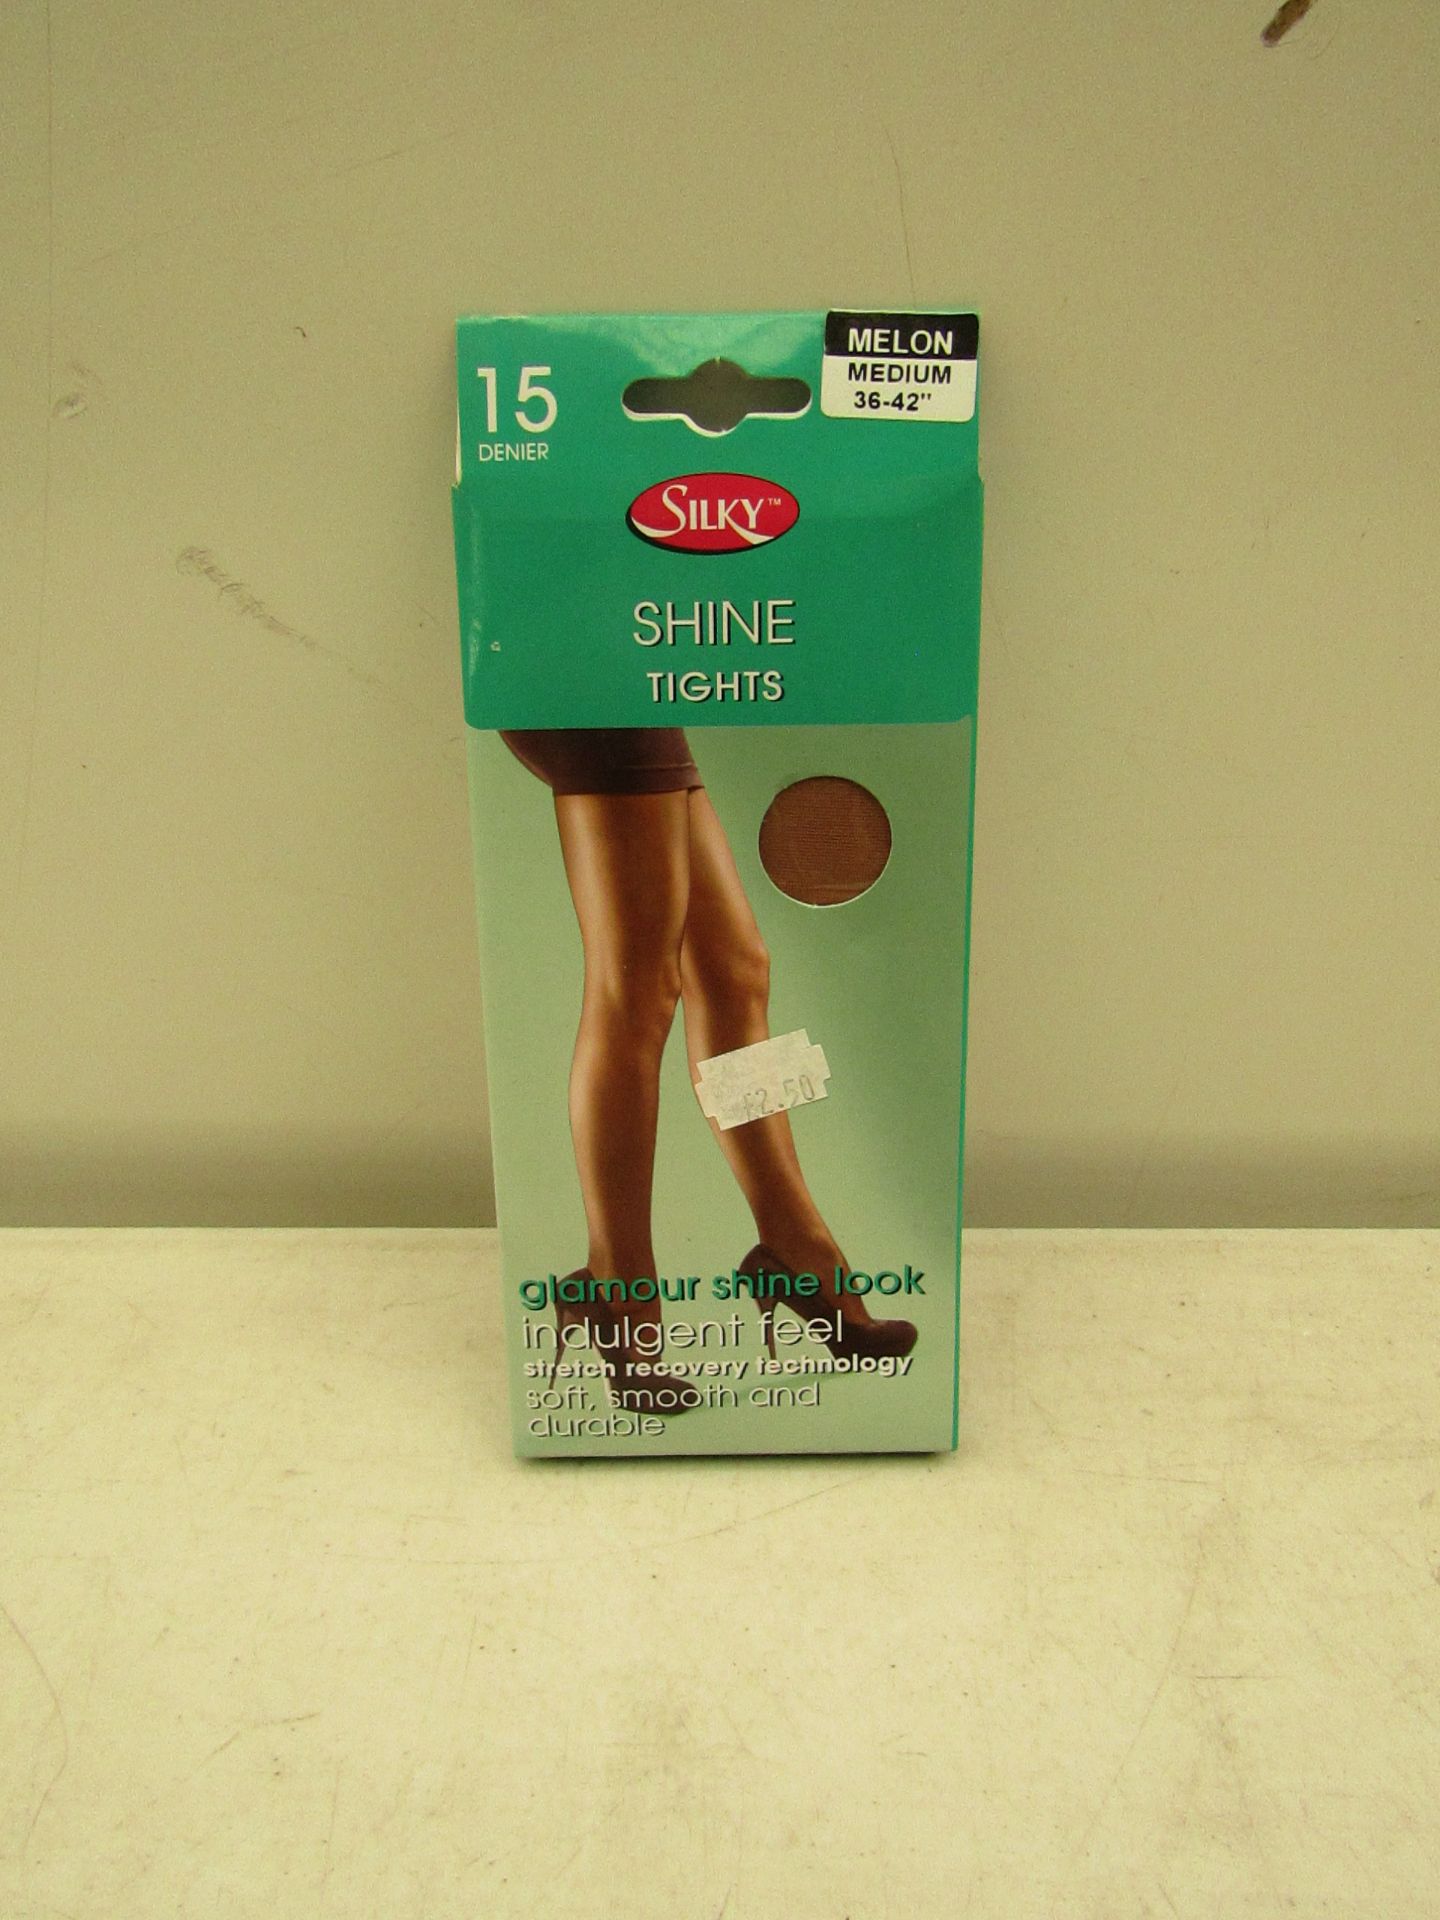 8x Silky shine tights glamour shine look, new and boxed.